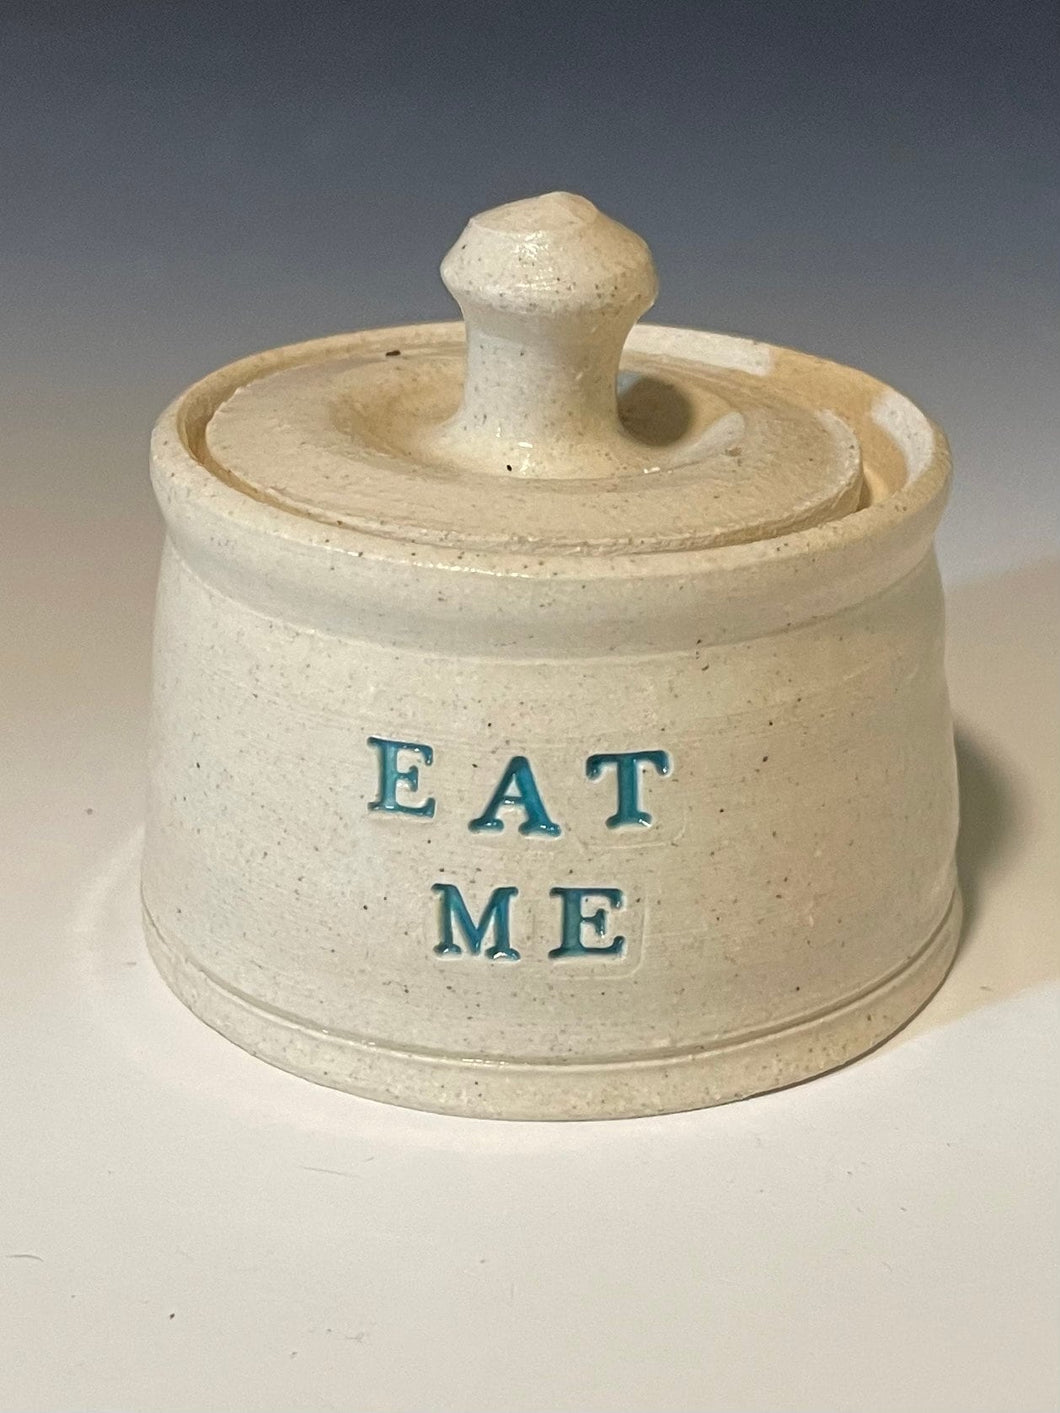 Tiny Eat Me Jar. need to shrink your ass down for entry into some fucked up land with queens and rabbits 'n' shit? look no further.